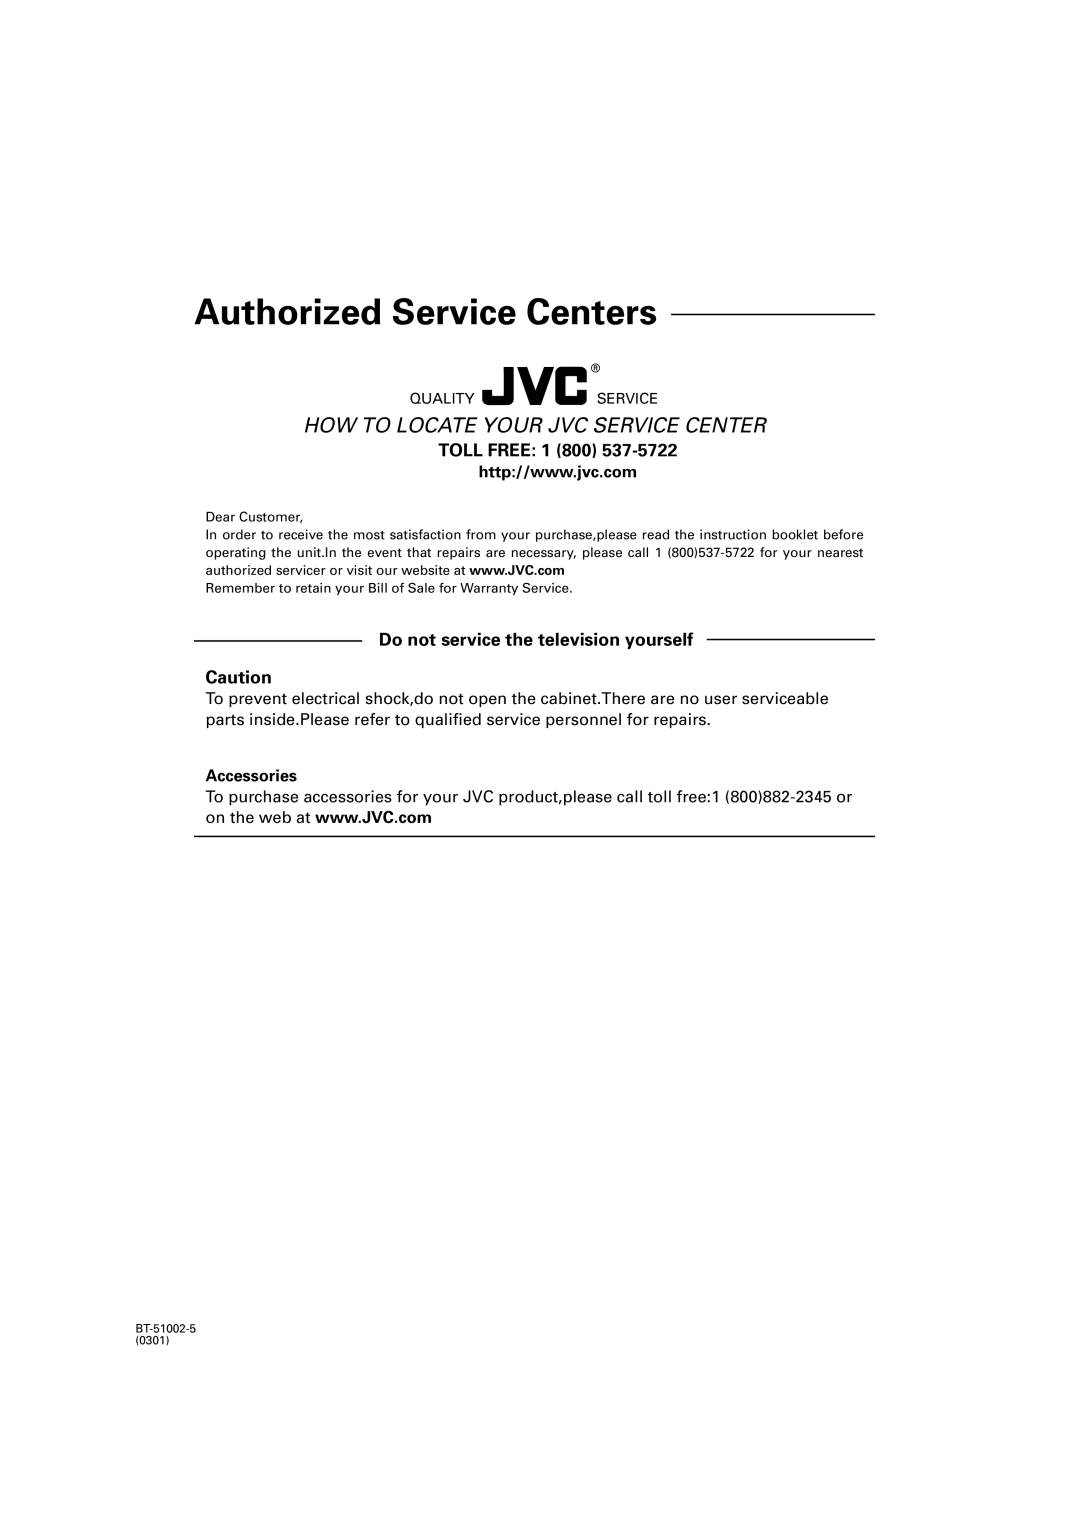 JVC MX-GT700 manual TOLL FREE 1, Do not service the television yourself, Authorized Service Centers, Accessories 